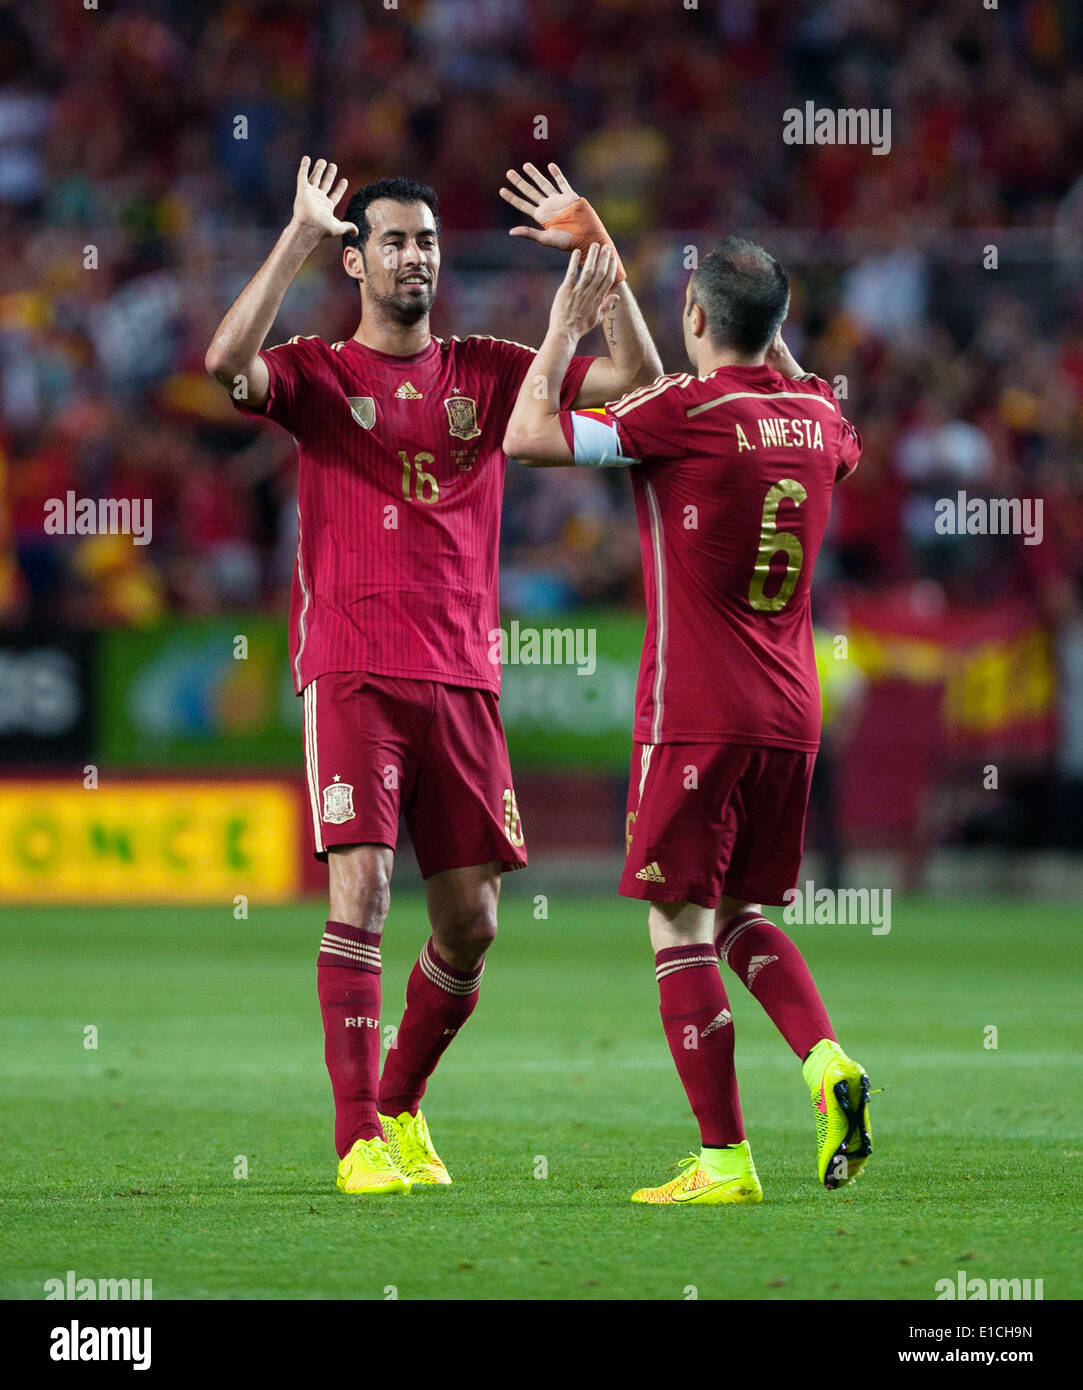 Sevilla. 30th May, 2014. Spain's Andres Iniesta (R) celebrates with teammate after scoring during the international friendly football match against Bolivia in Sevilla on May 30, 2014. Spain won 2-0. © Xie Haining/Xinhua/Alamy Live News Stock Photo